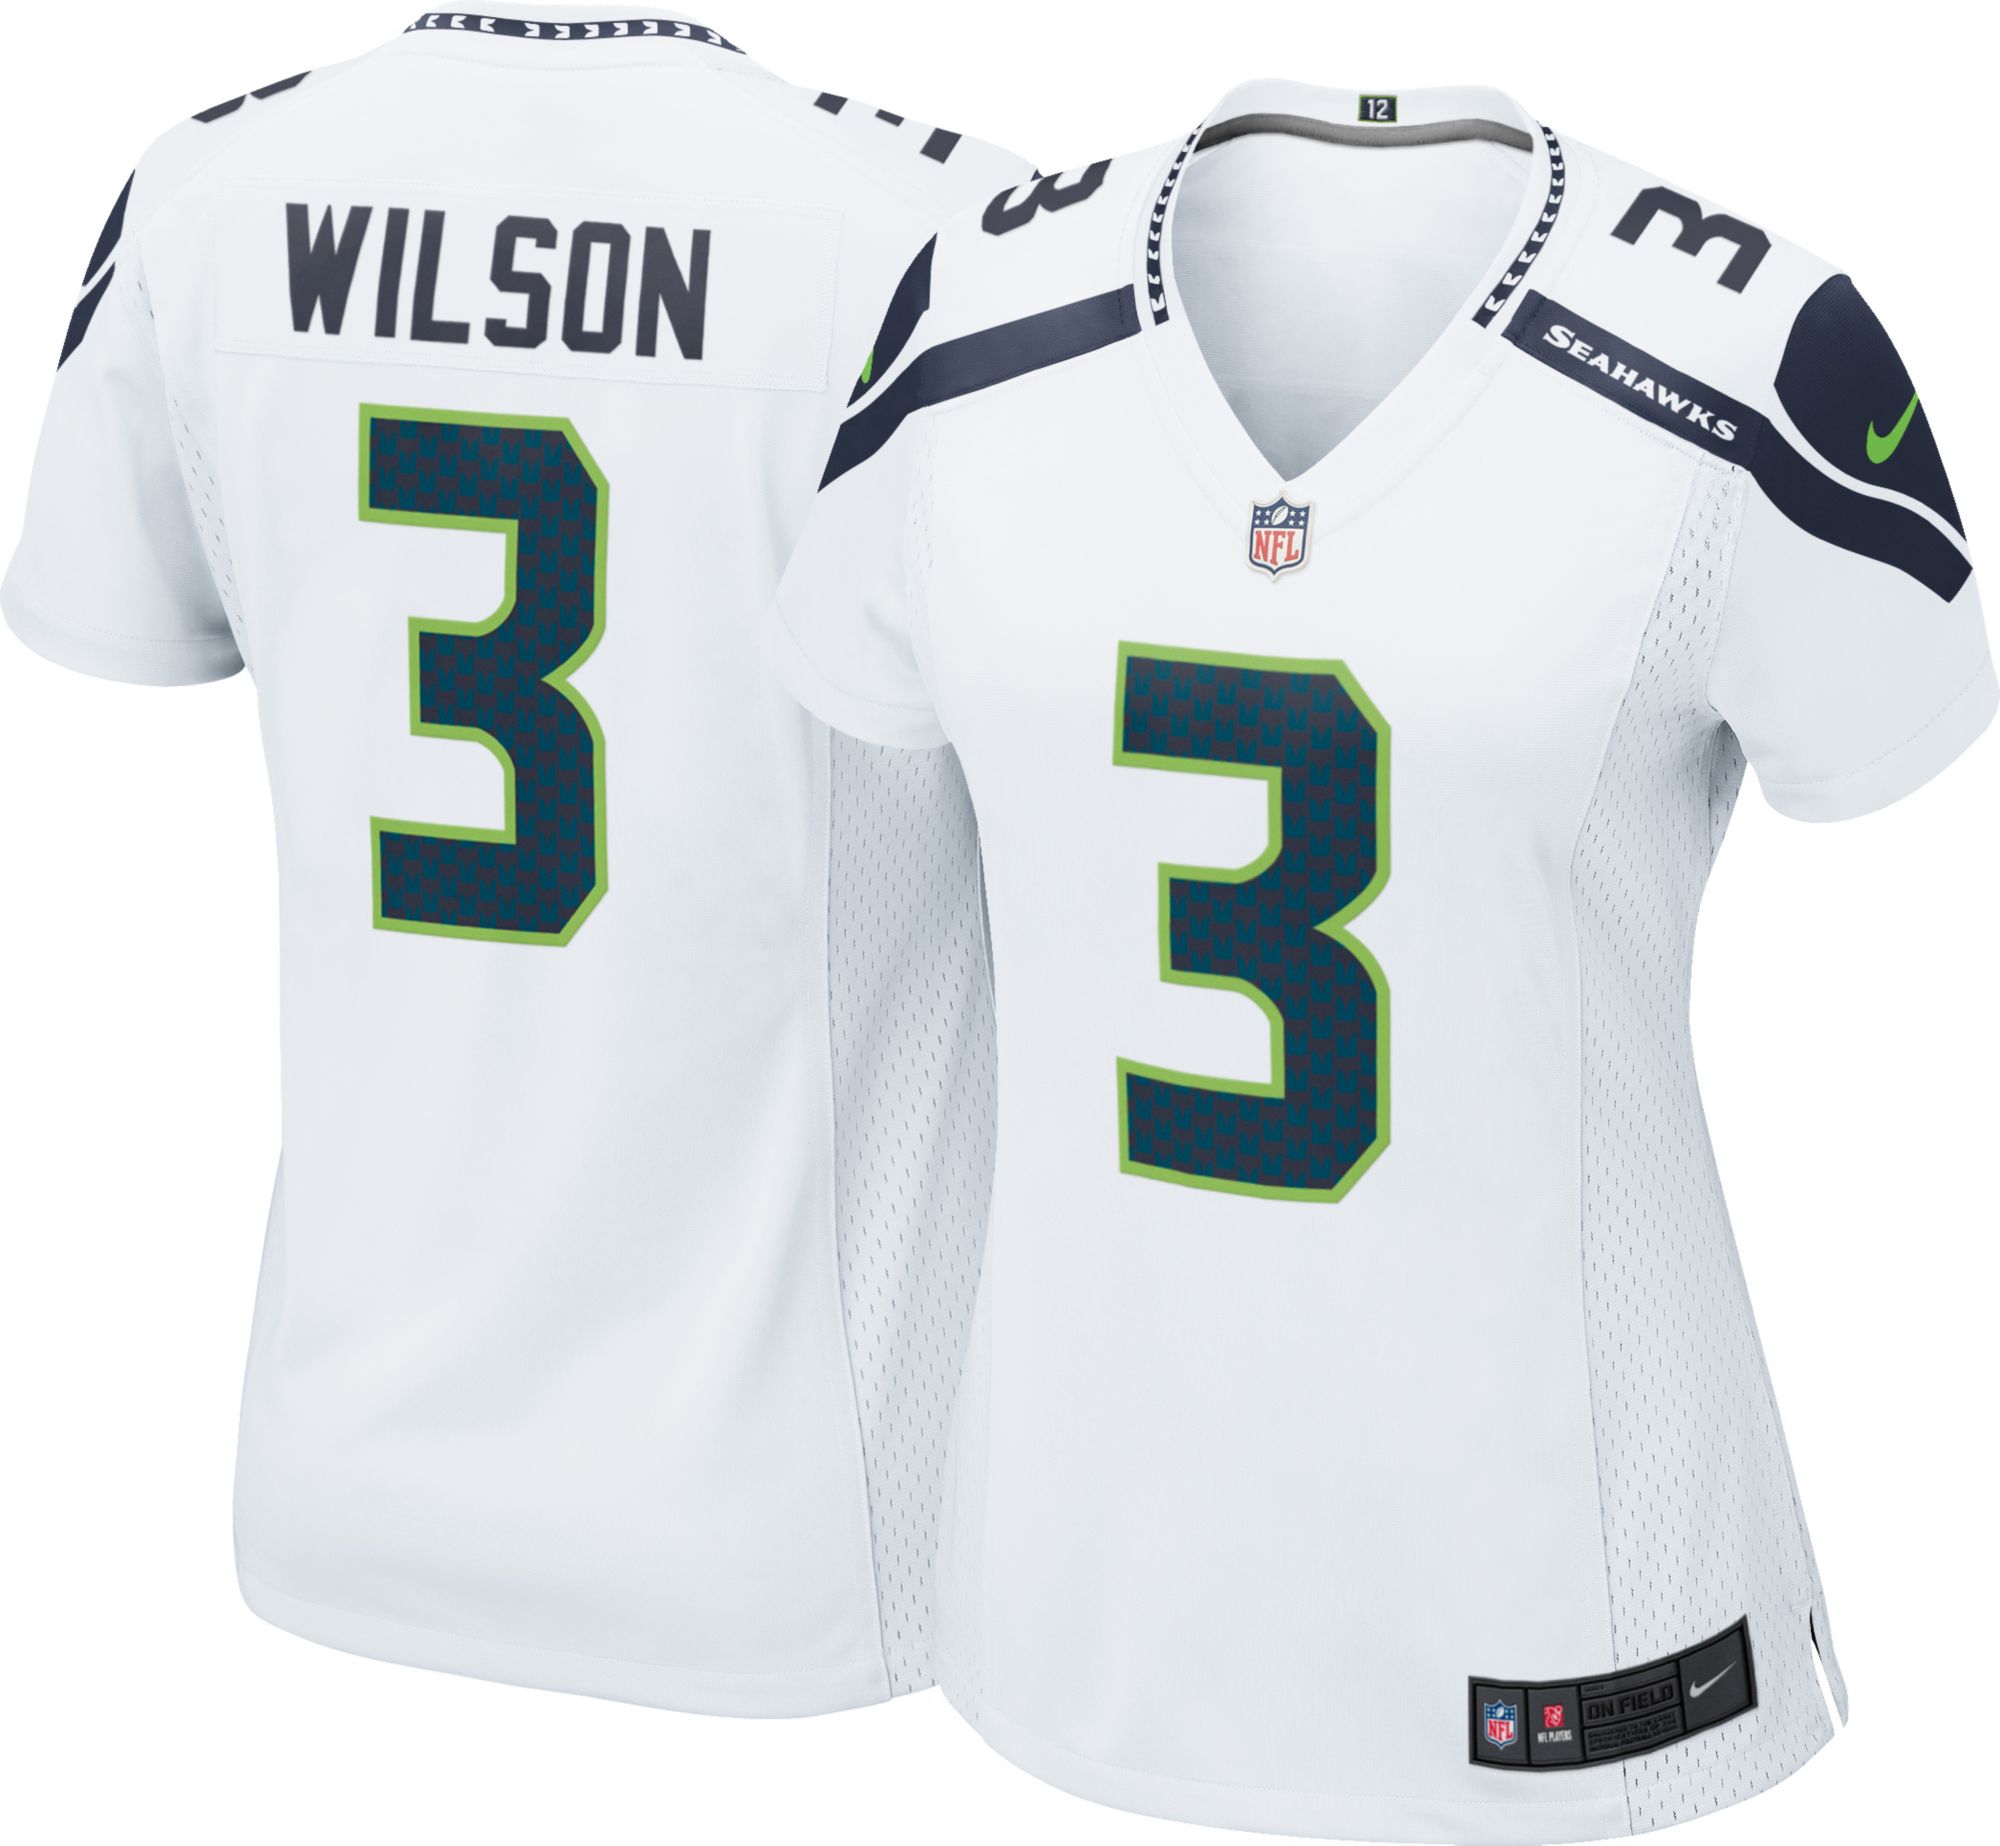 russell wilson youth jersey small